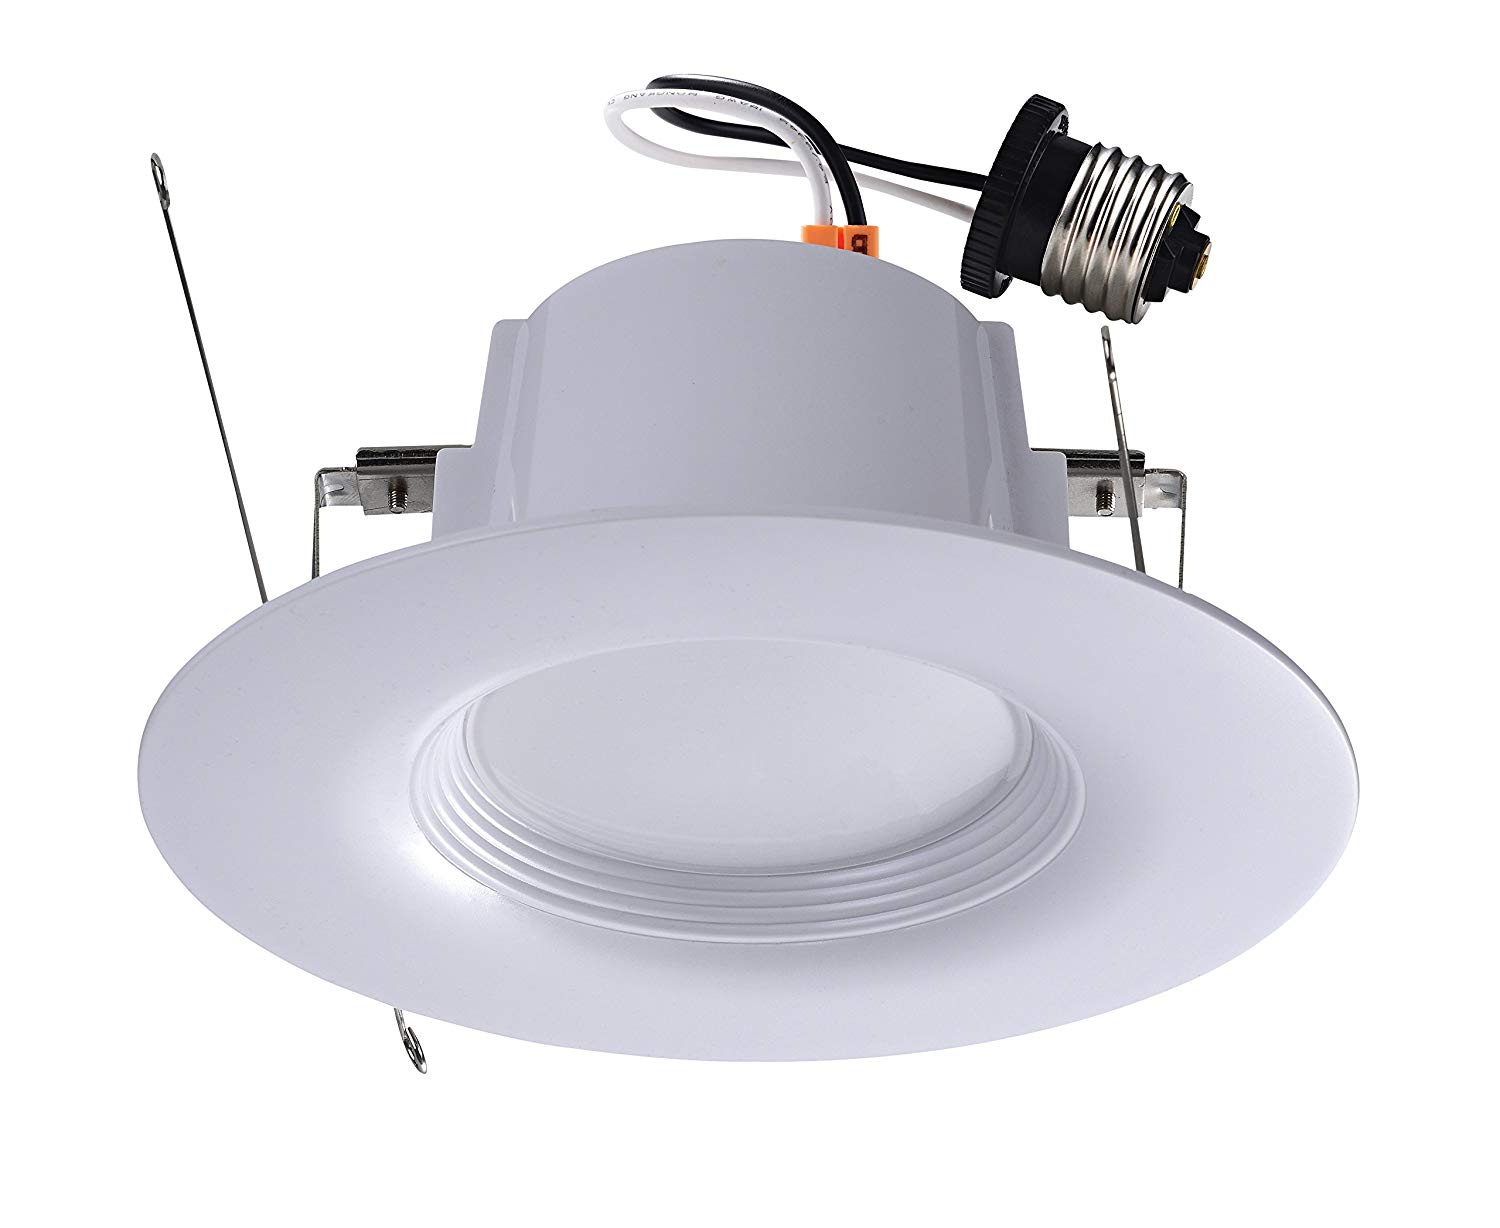 Pieces SLANG LED Modern Dimmable Retrofit Recessed Lighting Kit, Ceiling  Lights (5-6 Inch, 10 Watt, Warm White)